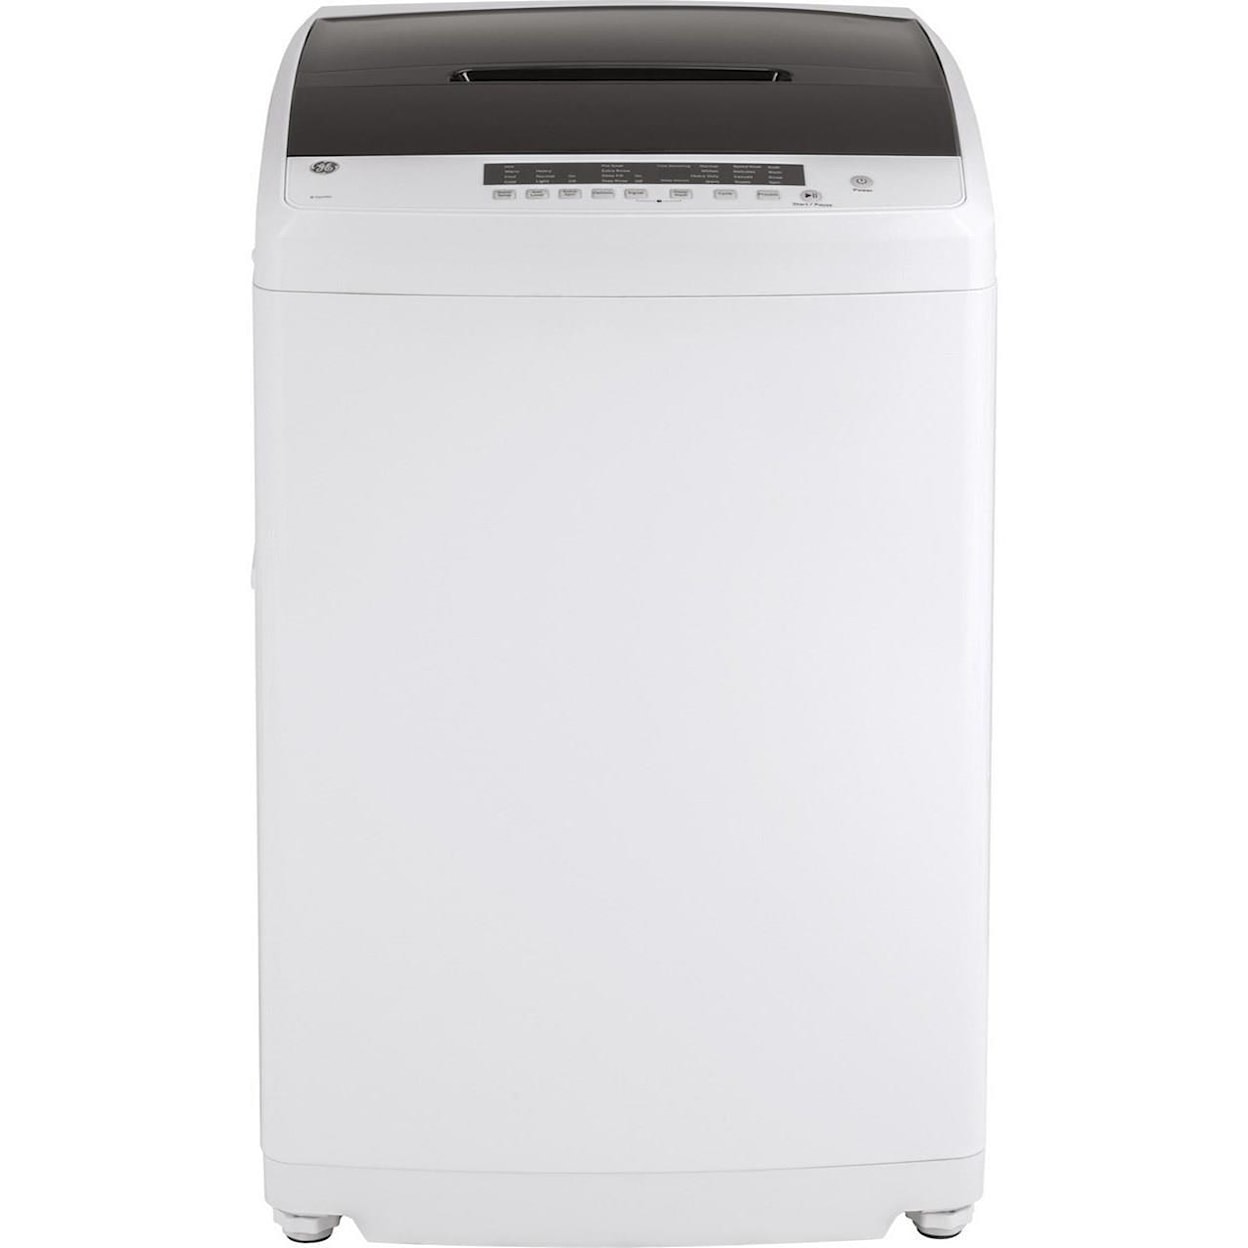 GE Appliances Home Laundry GE® Space-Saving 2.8 cu. ft. Portable Washer